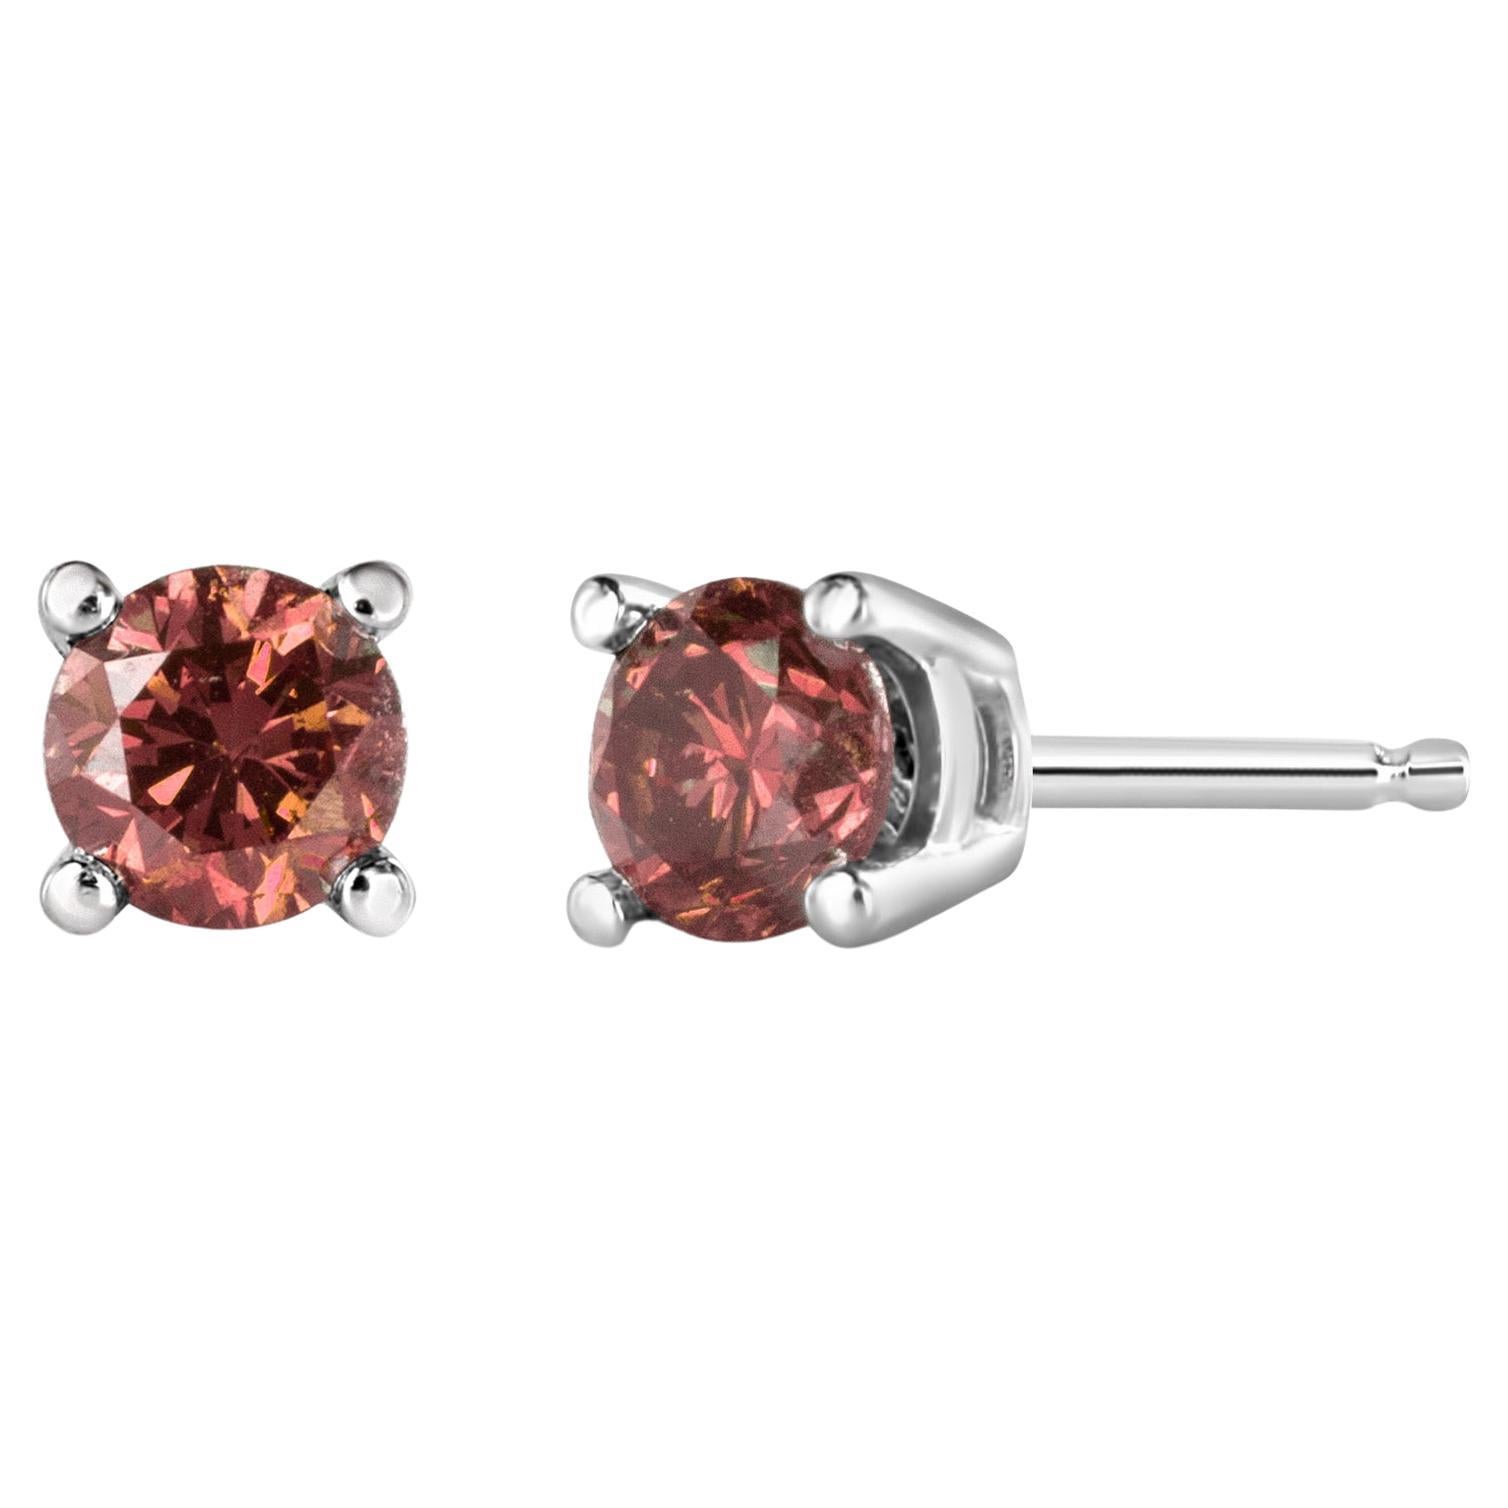 14K White Gold 1/2 Carat Round Brilliant-Cut Pink Diamond Solitaire Stud Earring